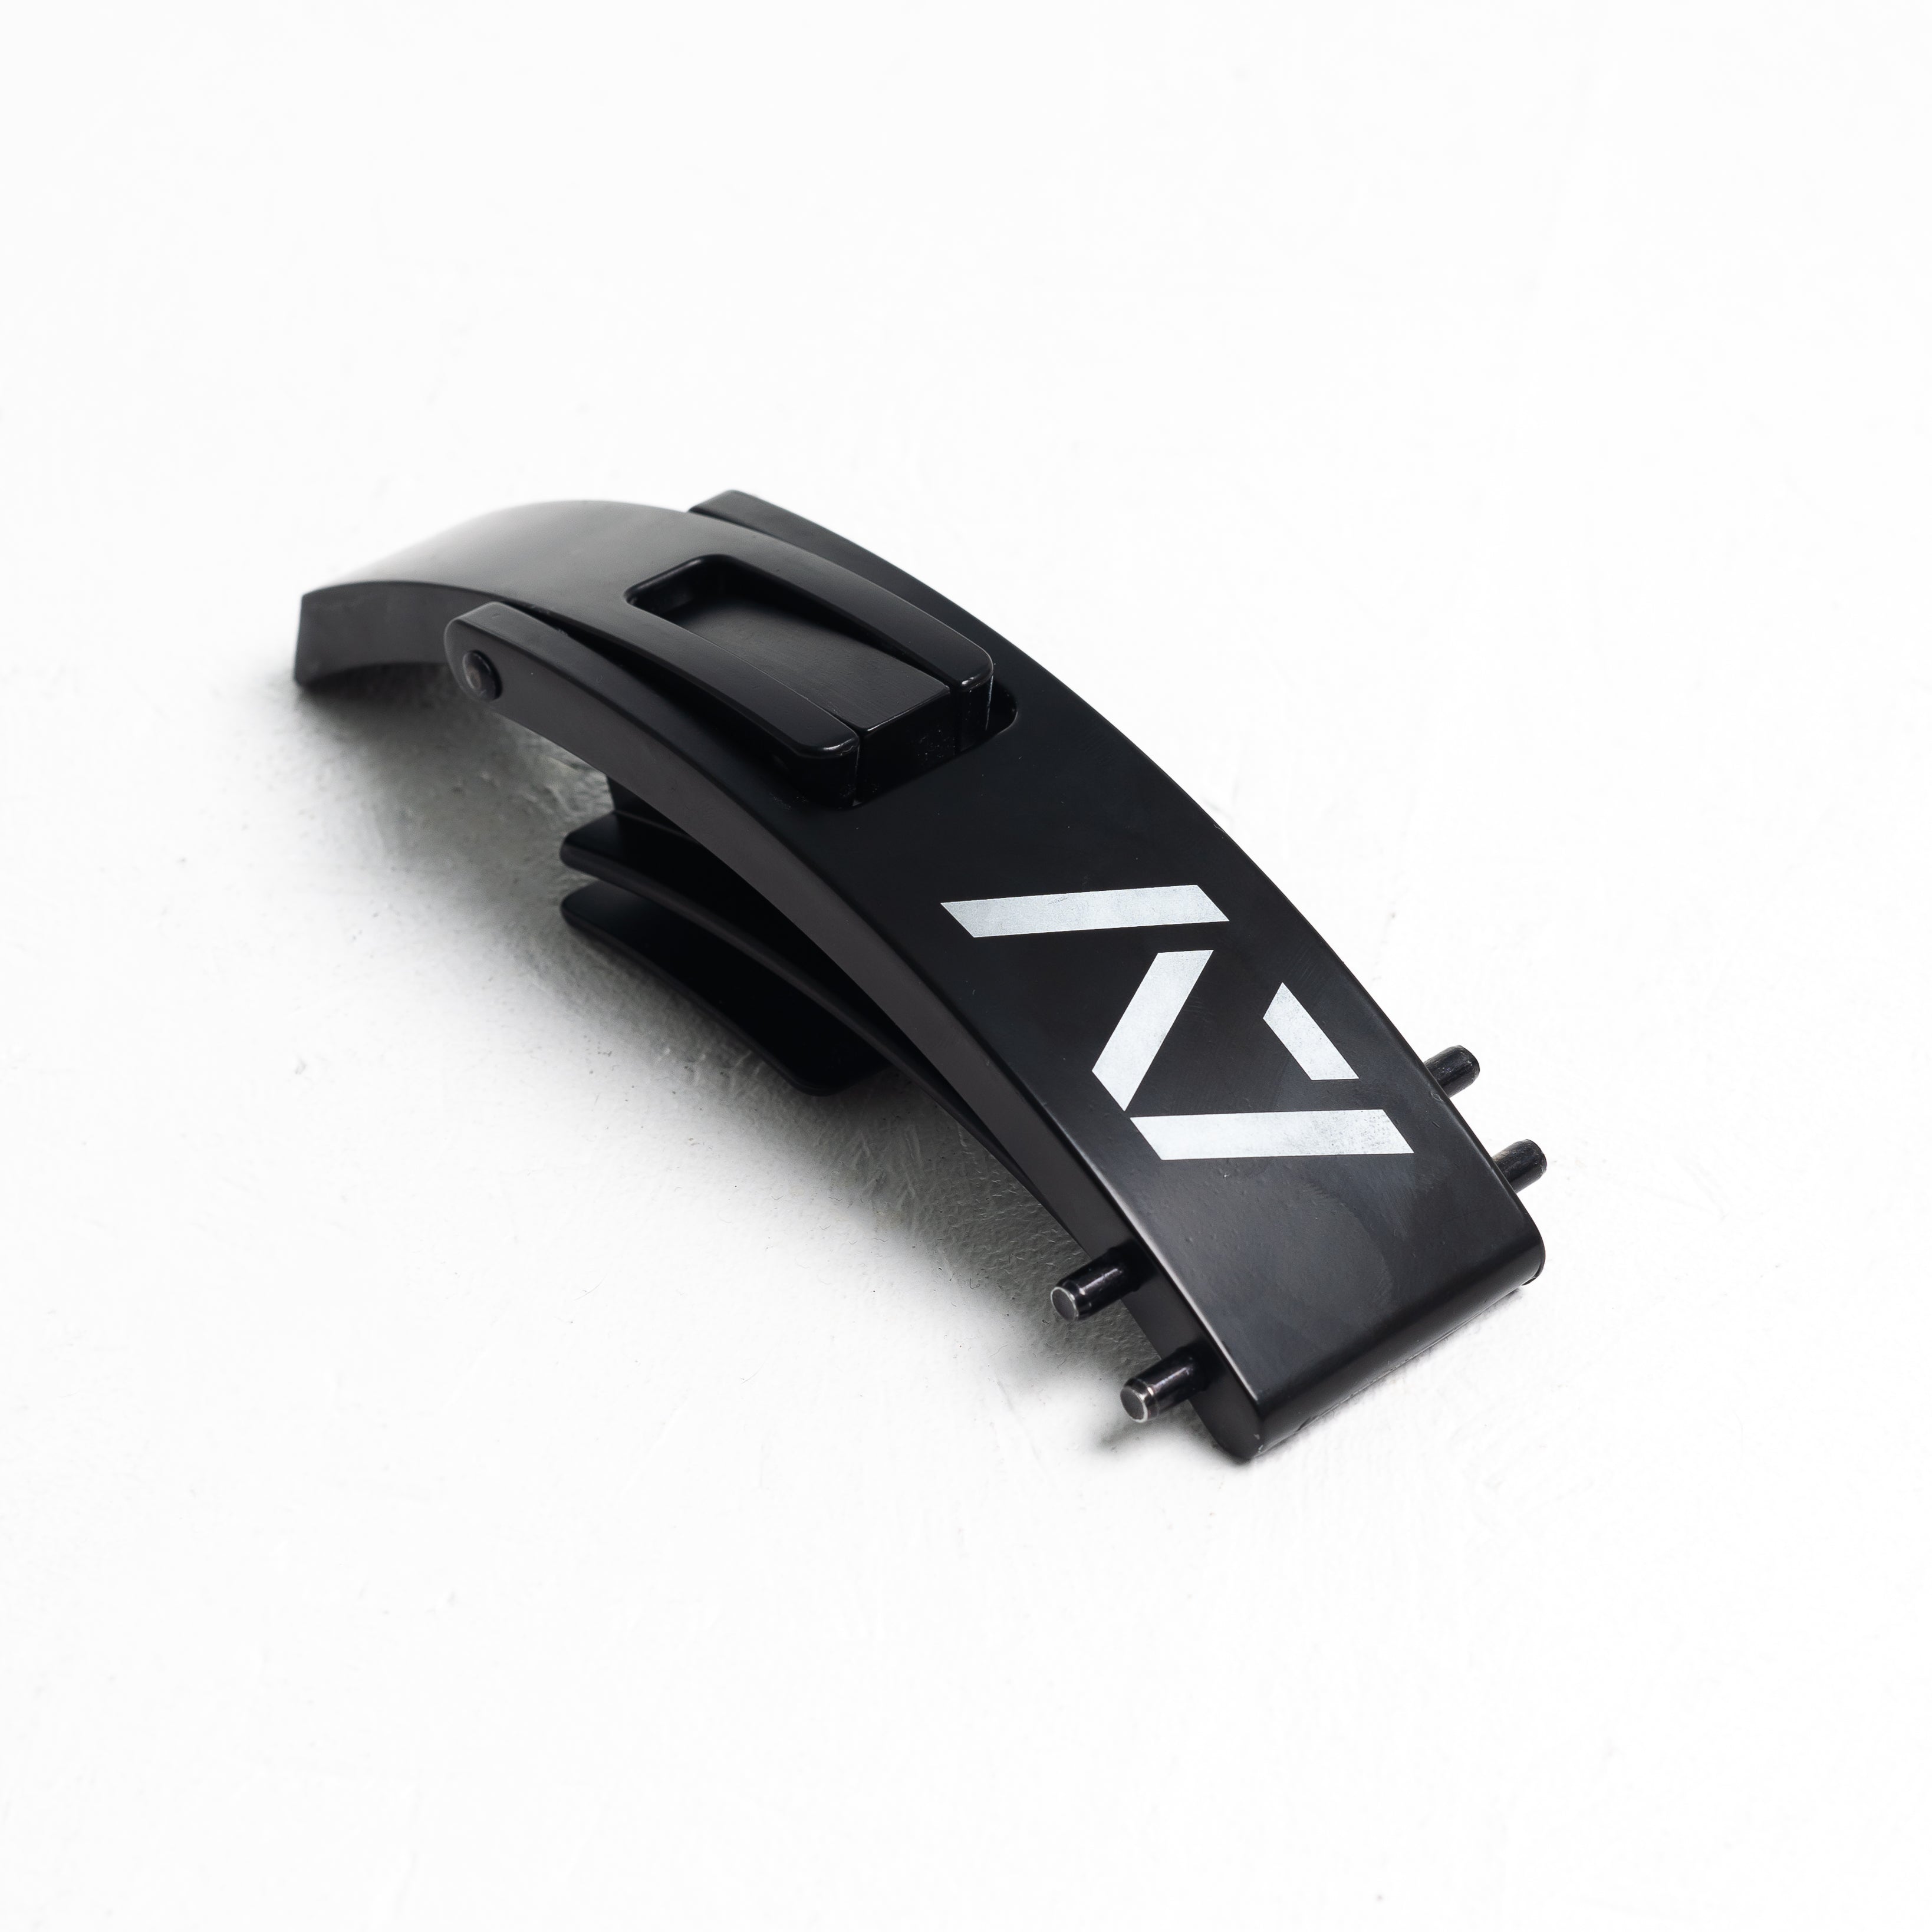 A7 IPF Approved PAL Lever Belt features a black design with black leather, black engraved buckle and debossed A7 logo on the leather. The new Pioneer Adjustable Lever, PAL, buckle allows you to quickly adjust the tightness of your belt for a perfect fit. The IPF Approved Kit includes Singlet, A7 Meet Shirt, A7 Zebra Wrist Wraps, A7 Deadlift Socks, Hourglass Knee Sleeves (Stiff Knee Sleeves and Rigor Mortis Knee Sleeves). All A7 Powerlifting Equipment shipping to UK, Norway, Switzerland and Iceland.